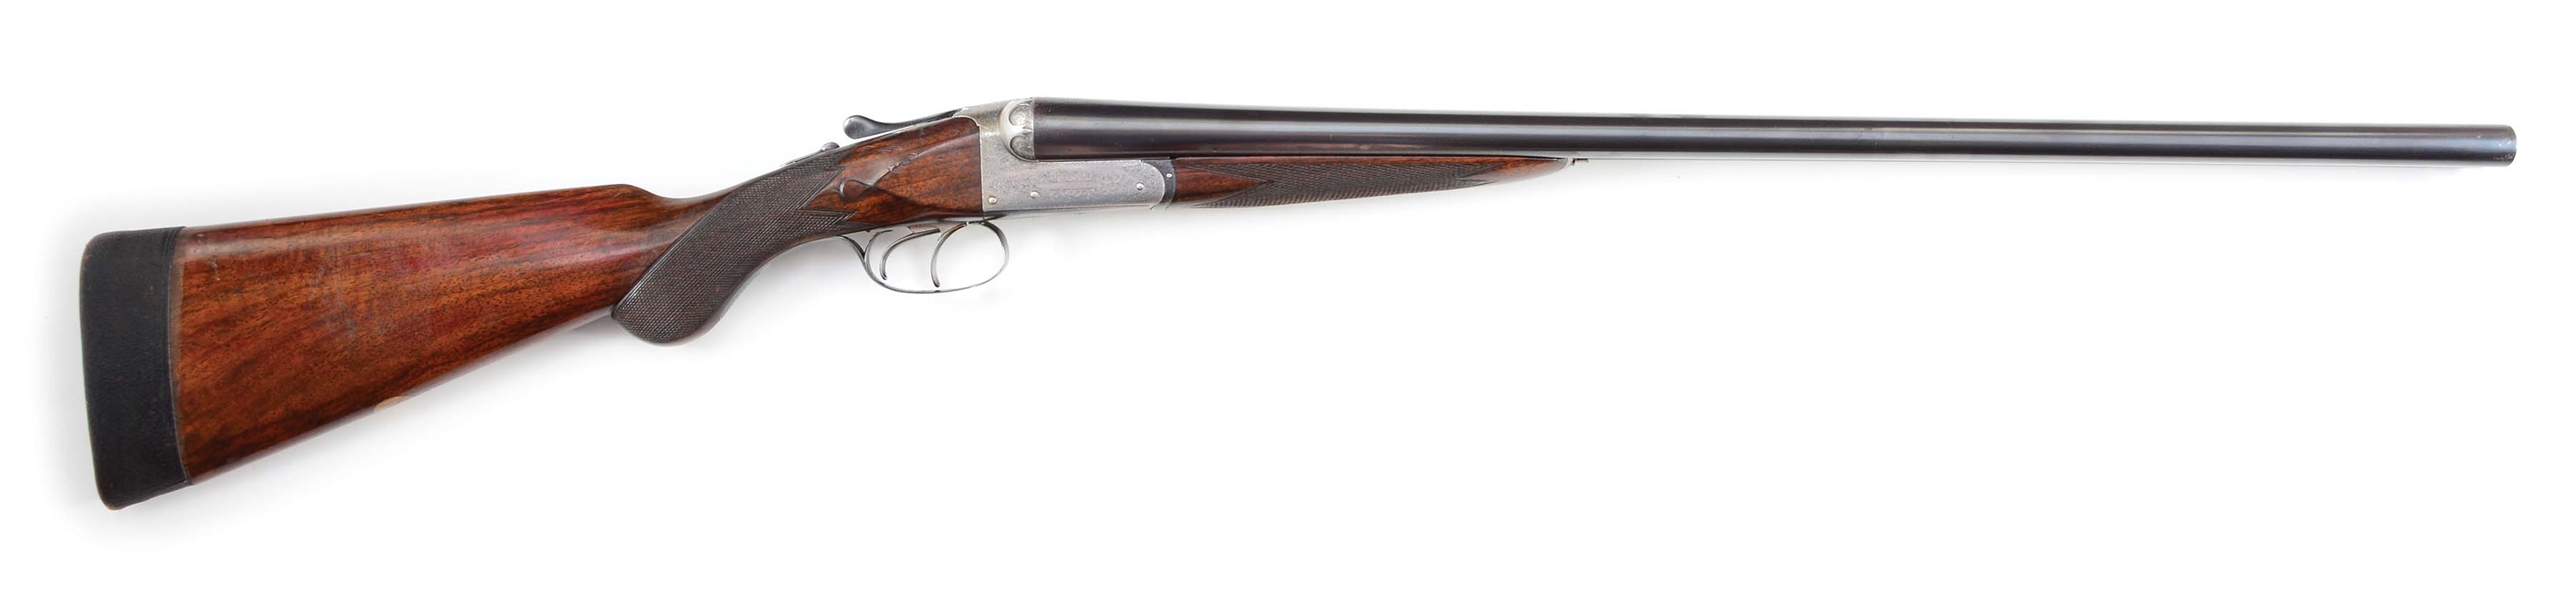 (C) INTERESTING J.J. LANGLEY BOXLOCK EJECTOR SHOTGUN WITH FINELY SCULPTED FENCES.